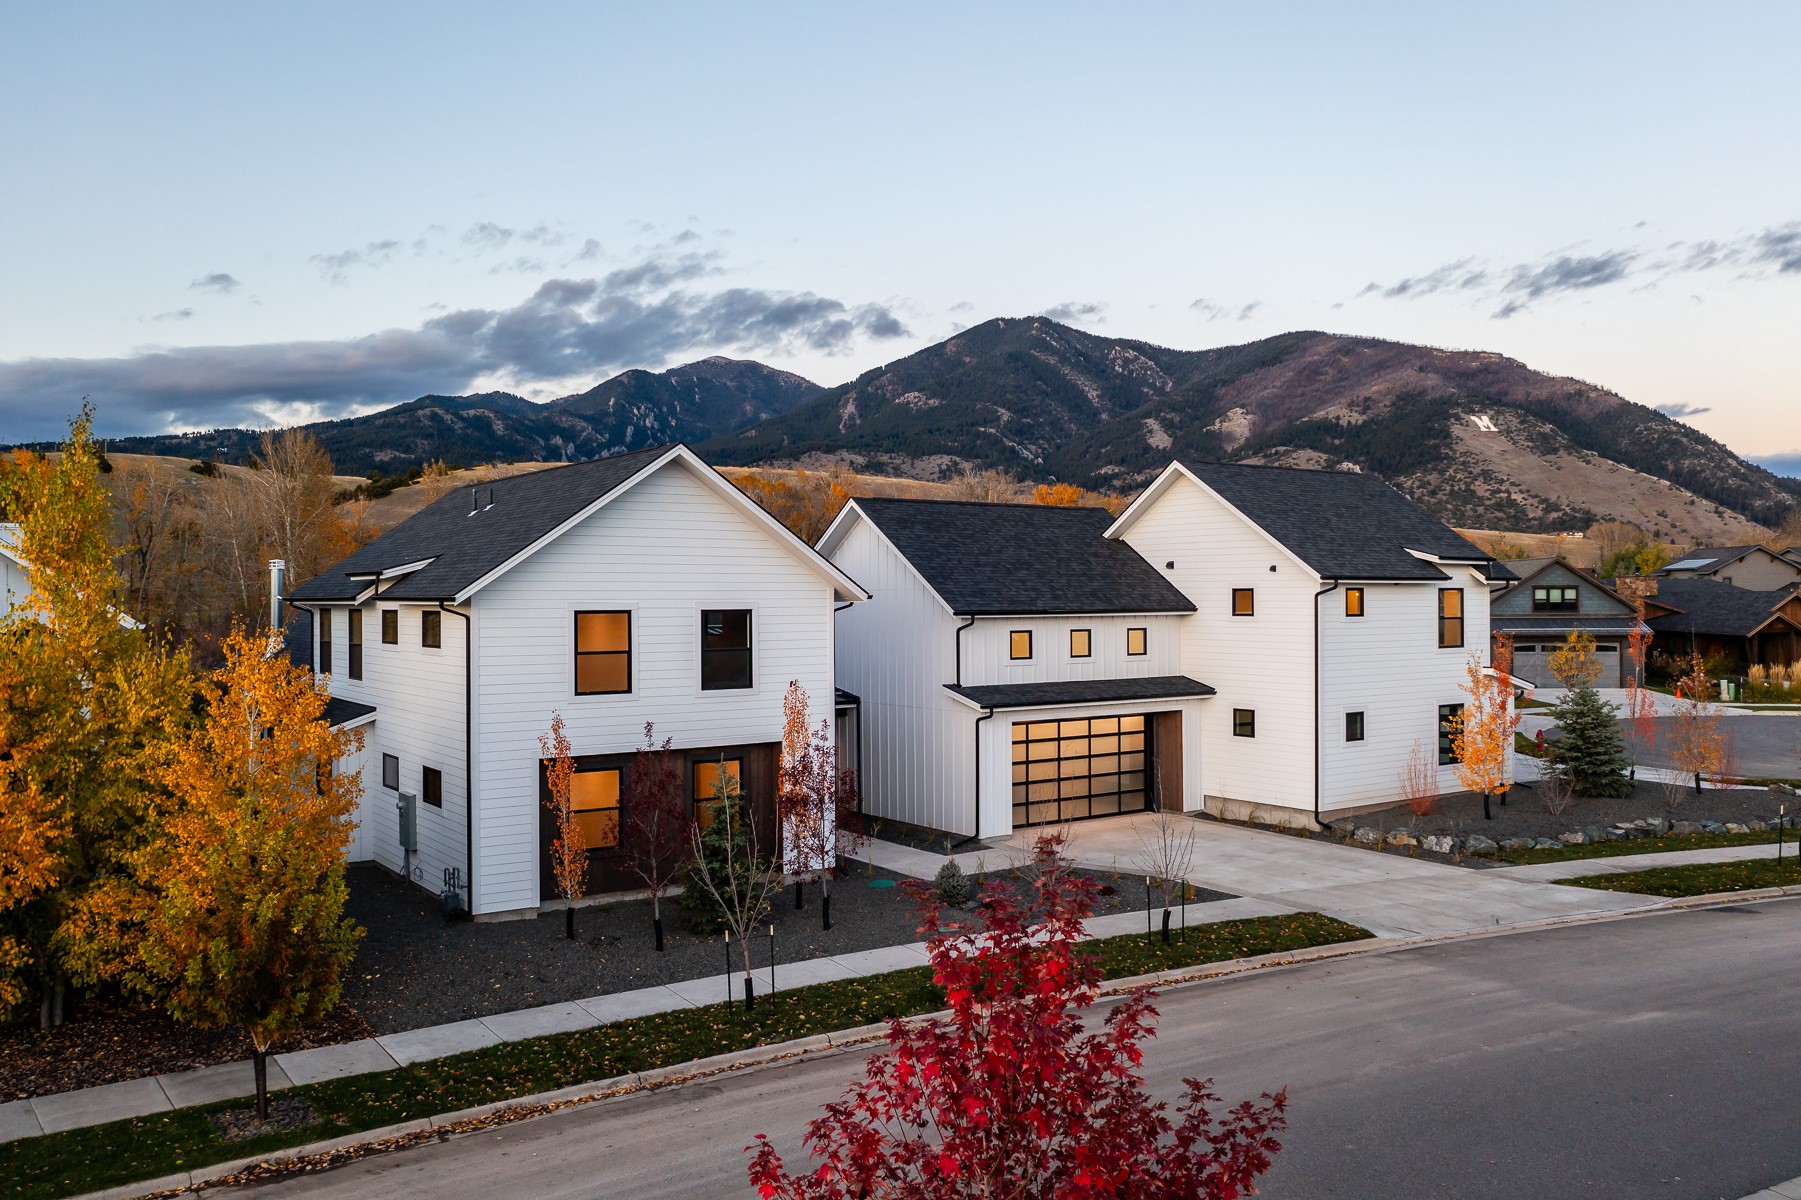 Experience the ultimate in Bozeman luxury in this stunning new construction home. Located in Legends subdivision on a 1/3-acre lot with top-of-the-line finishes. Backs to open space with trails. Architecturally designed + meticulously built, this home has a great floorplan: 4012 sq ft main house, a 1 bed/1 ba ADU + two 2-car garages. Solid surface flooring - European oak hardwood + tile. Wood cabinetry and quartz counters. Sound insulation. Thermador, Pella, Dornbracht, Toto. 16’ ceilings in great room - wood burning fireplace. Primary suite with 14’ ceiling. Primary bath w/ soaking tub, heated floor, steam shower. Each bed has ensuite bath. Flex/bonus room on 2nd. Laundry/mud room. 3 furnaces w/ AC. Landscaping w/ retaining walls, irrigation, perennials, trees, sod. Neighborhood trails link to parks, Bridger Creek Golf Course, downtown Bozeman, Bridger mountains + Story Mill Park. 20 mins to Bridger Bowl, 5 mins to dining, shopping + amenities. Don’t miss the 360 VR Matterport Tour!